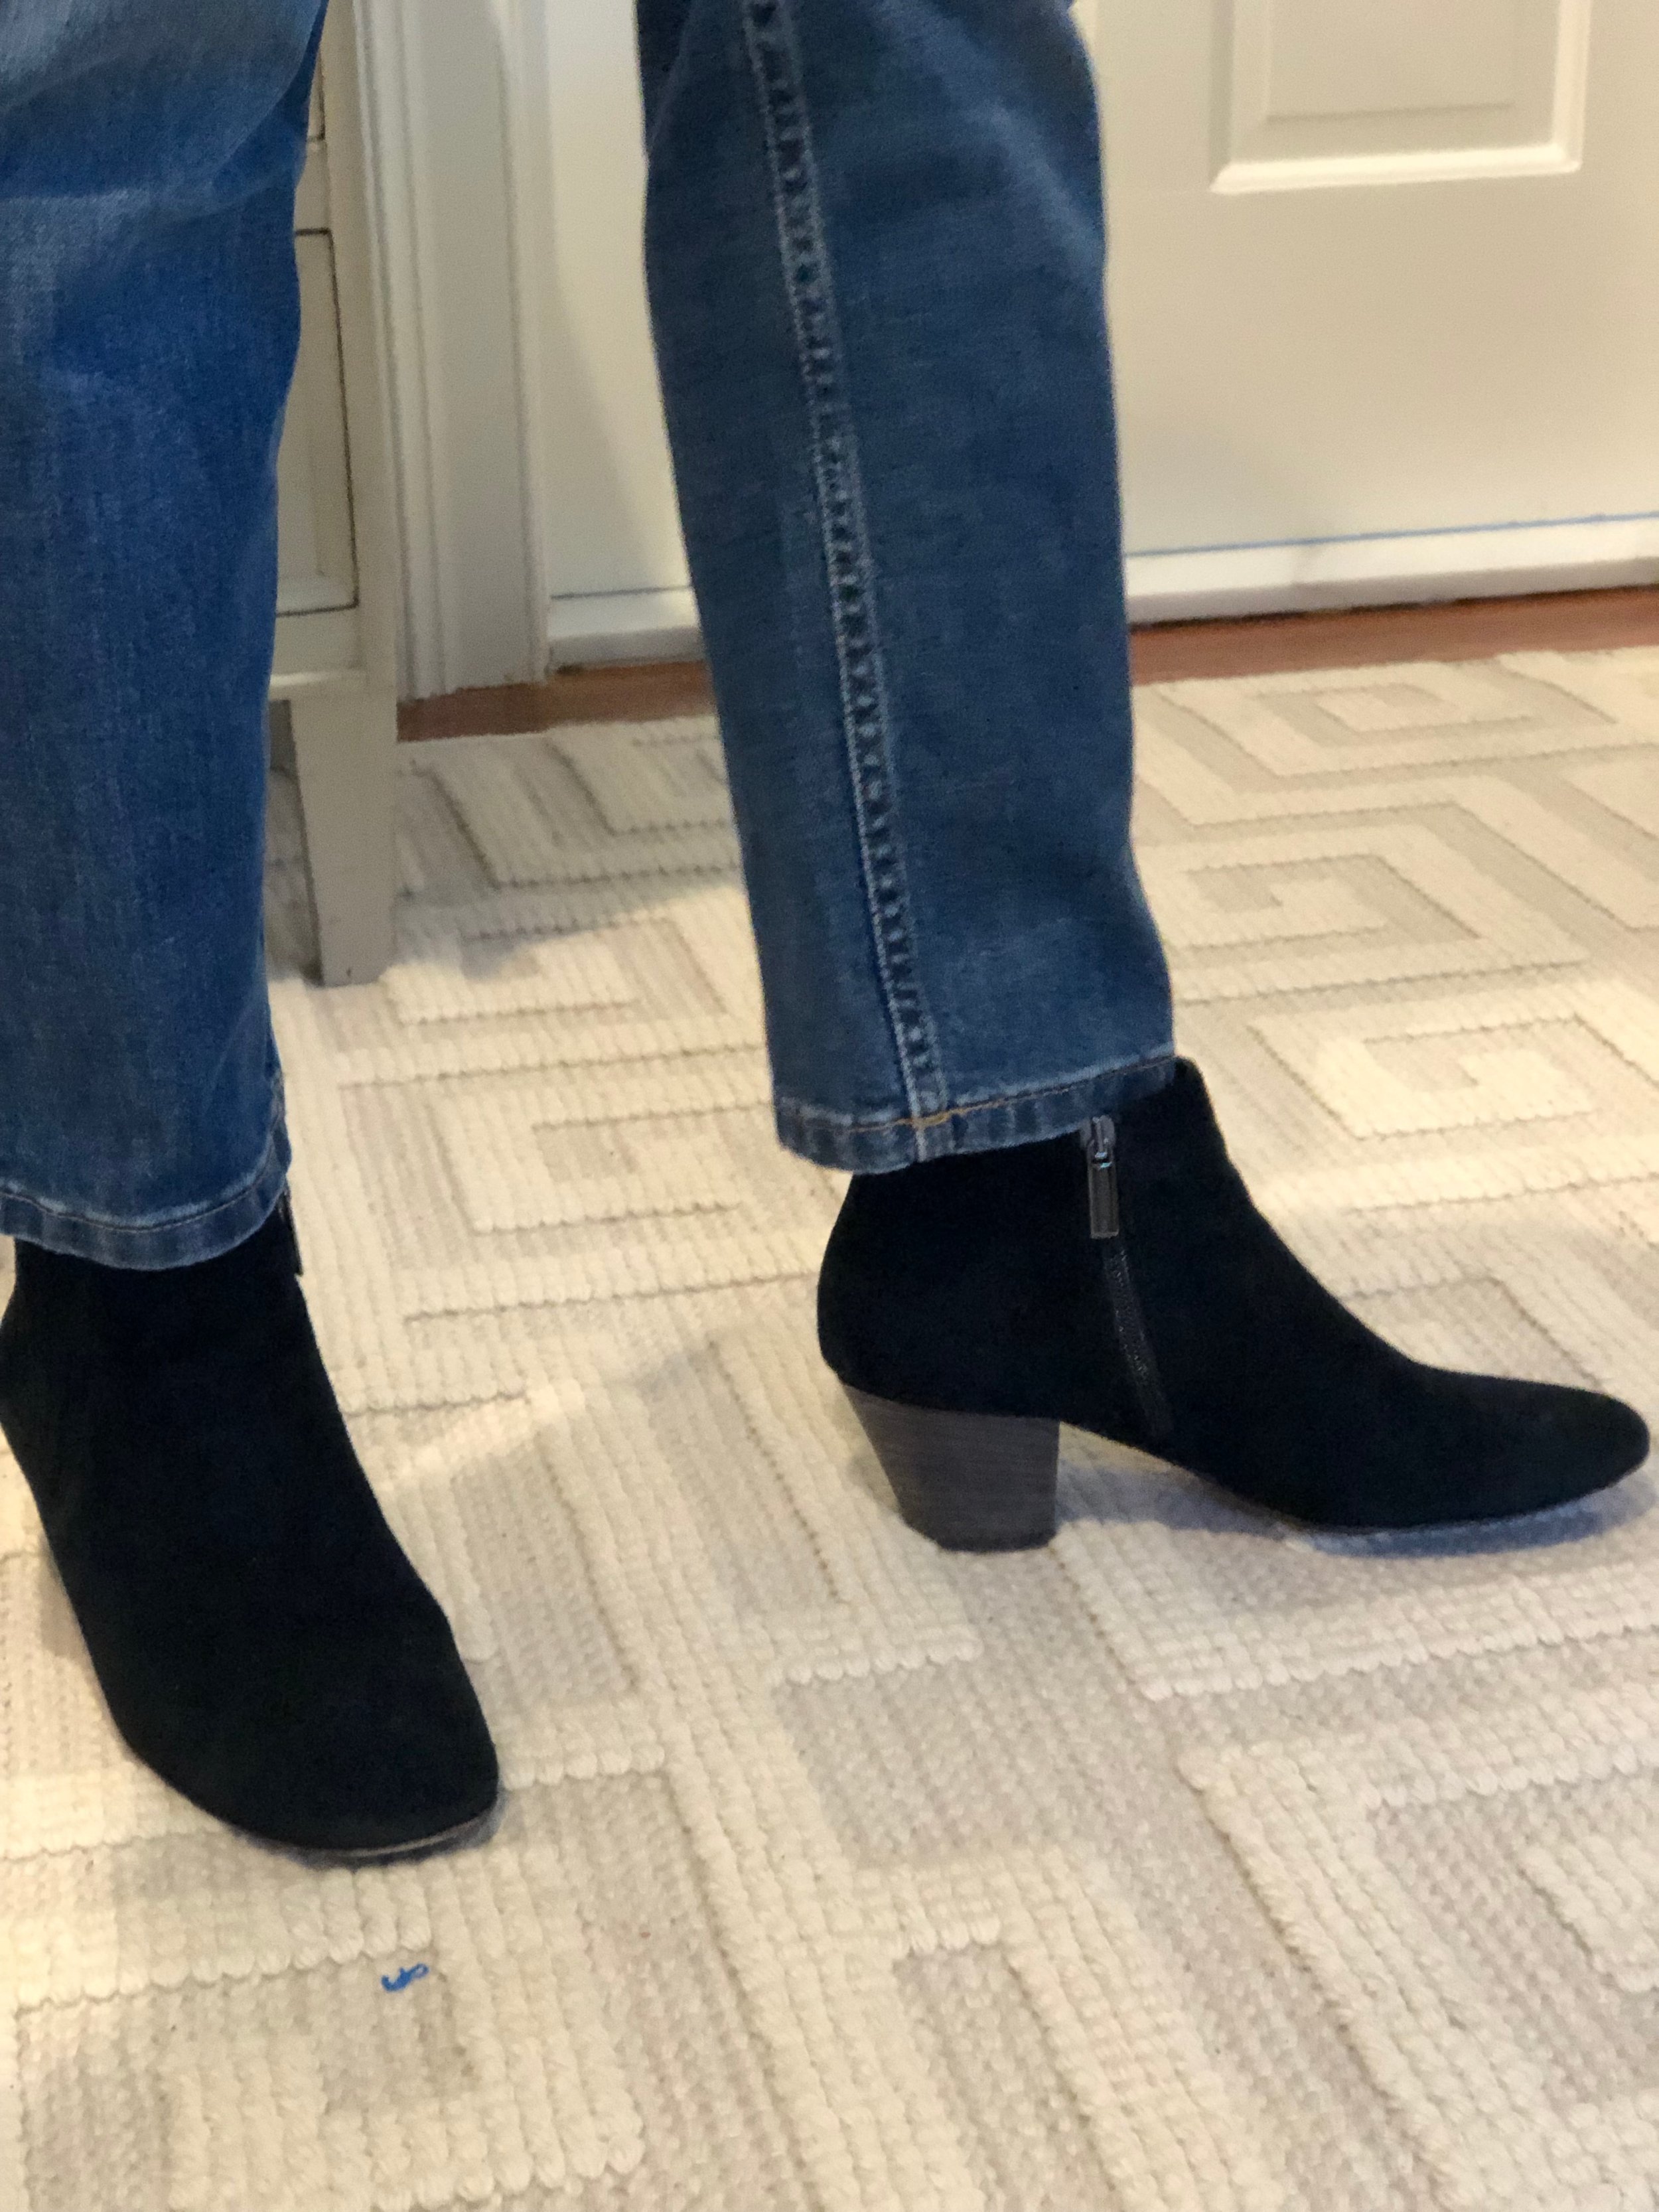 Jeans + Top of Boots Meet